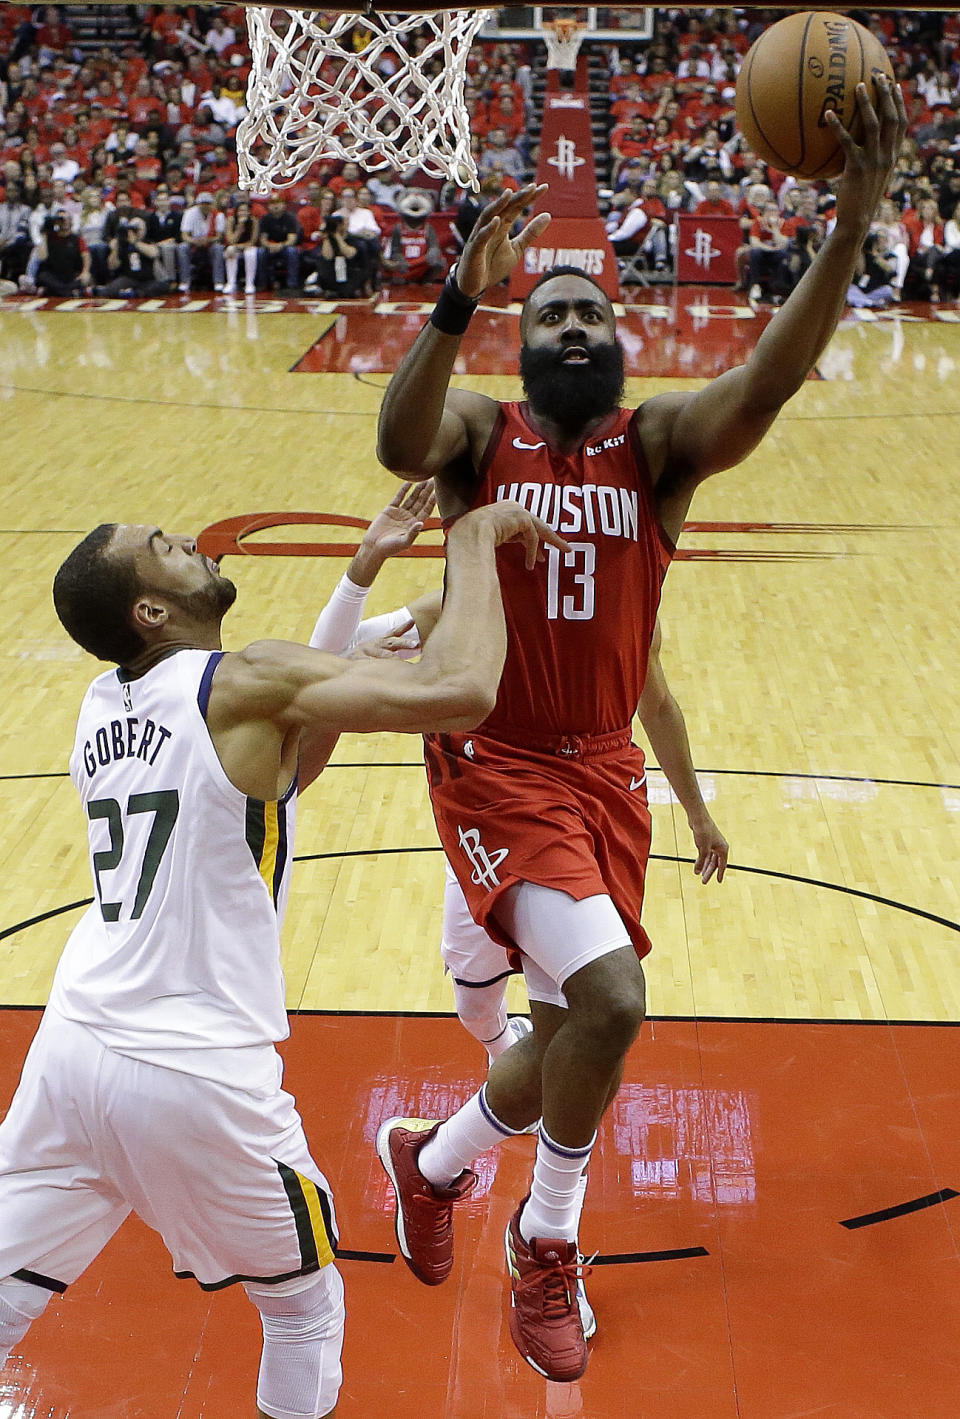 Houston Rockets guard James Harden (13) drives to the basket as Utah Jazz center Rudy Gobert defends during the second half of Game 1 of an NBA basketball first-round playoff series, Sunday, April 14, 2019, in Houston. Houston won the game 122-90. (AP Photo/Eric Christian Smith)